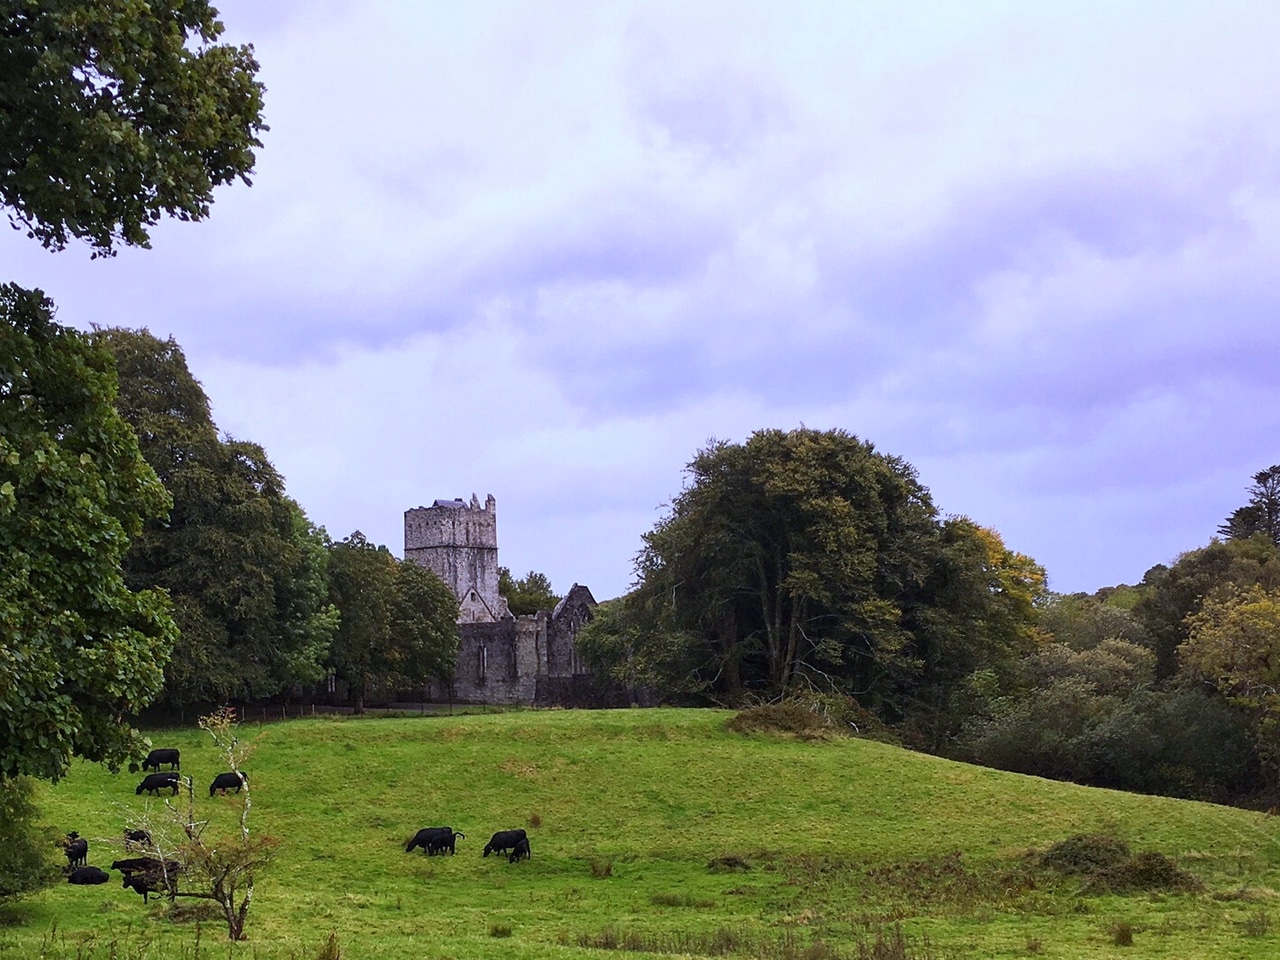 You can see Muckross Abbey in the distance through the trees. - "What to See When You Visit Killarney National Park" - Two Traveling Texans